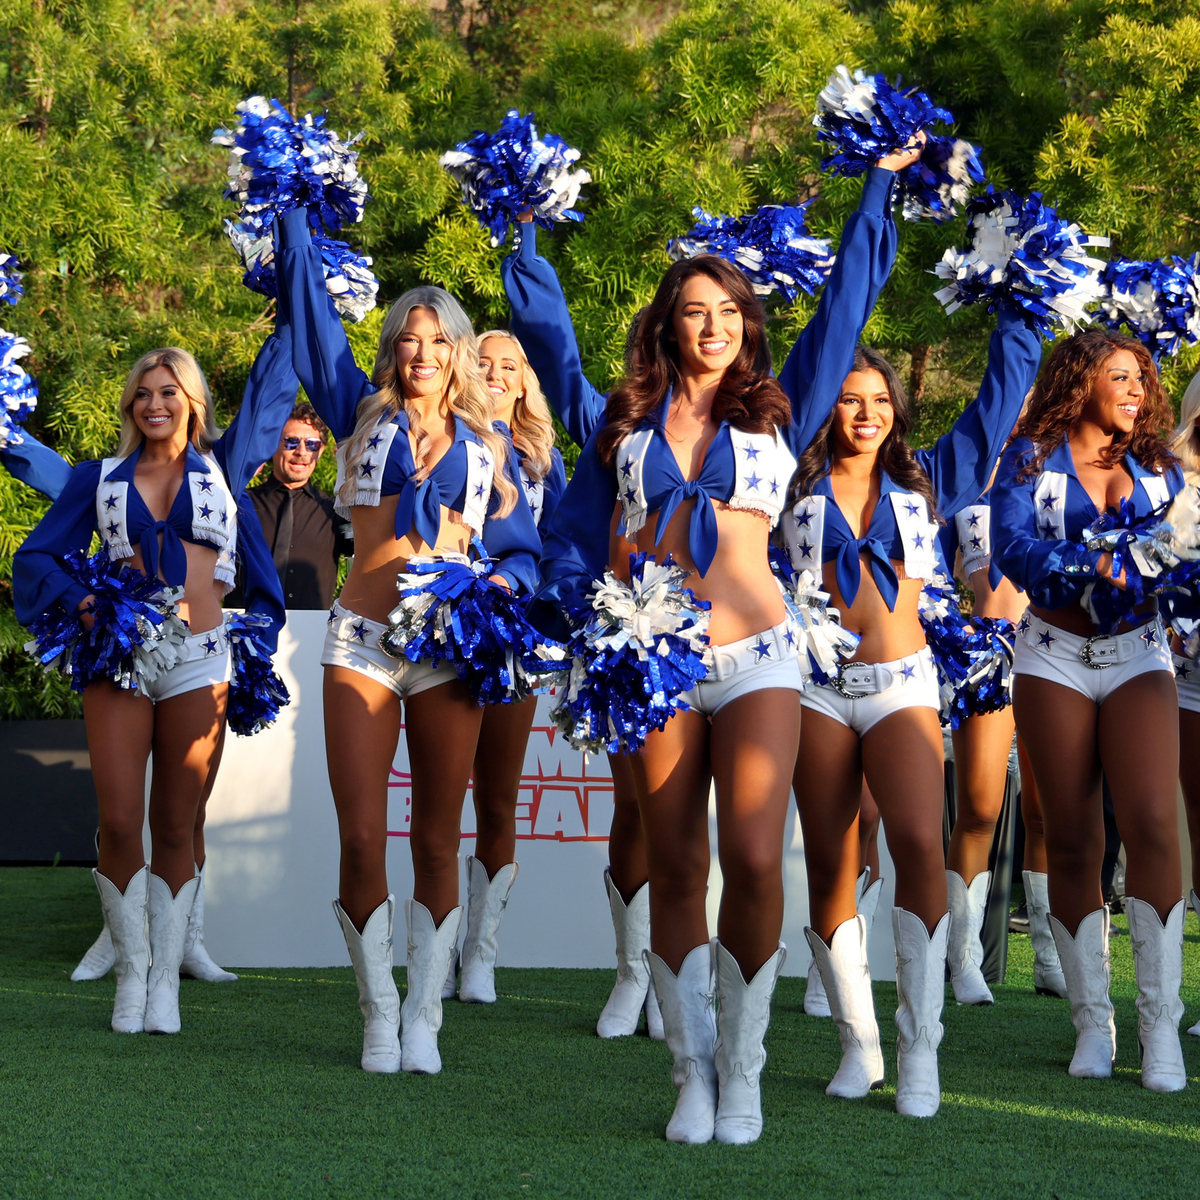 How the Dallas Cowboys Cheerleaders Changed their Views on Body Image